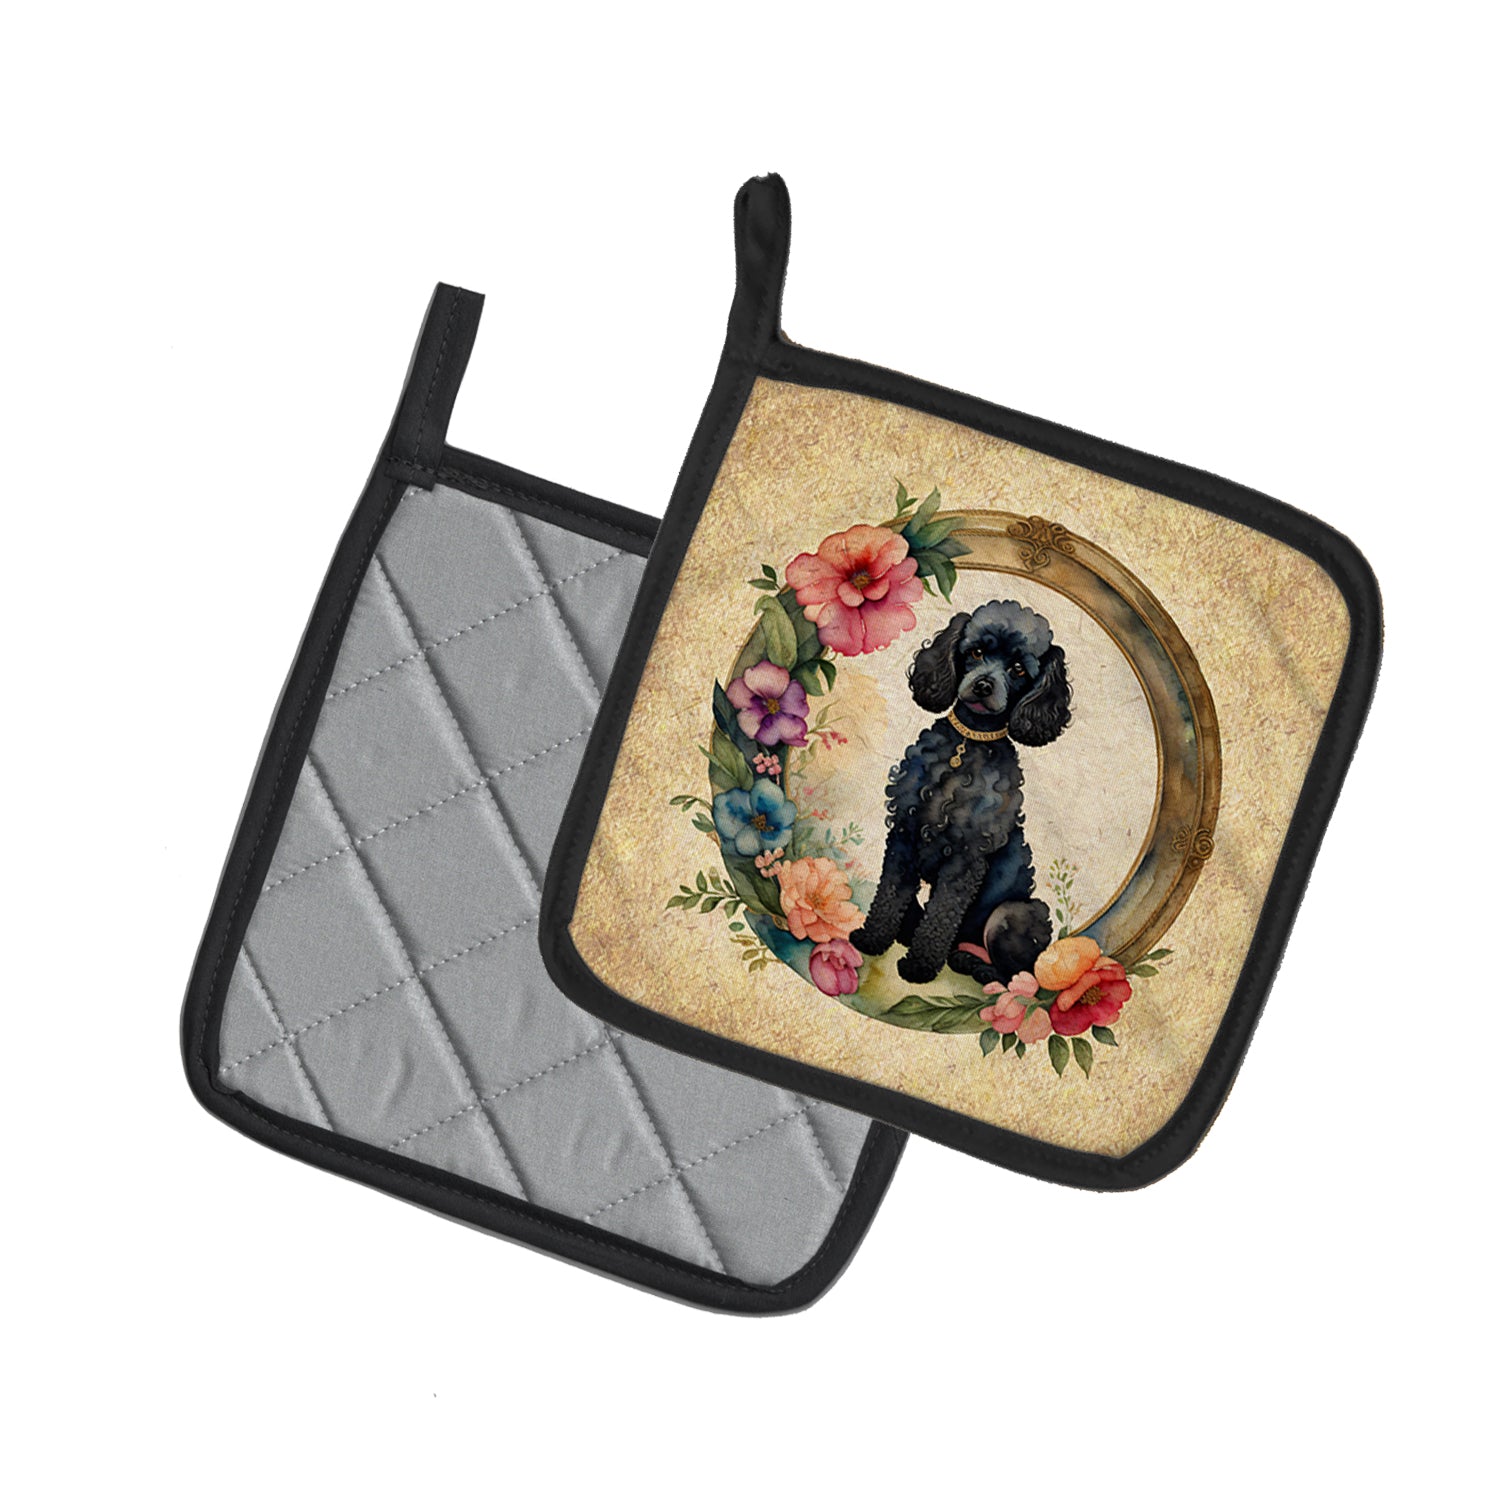 Buy this Black Poodle and Flowers Pair of Pot Holders